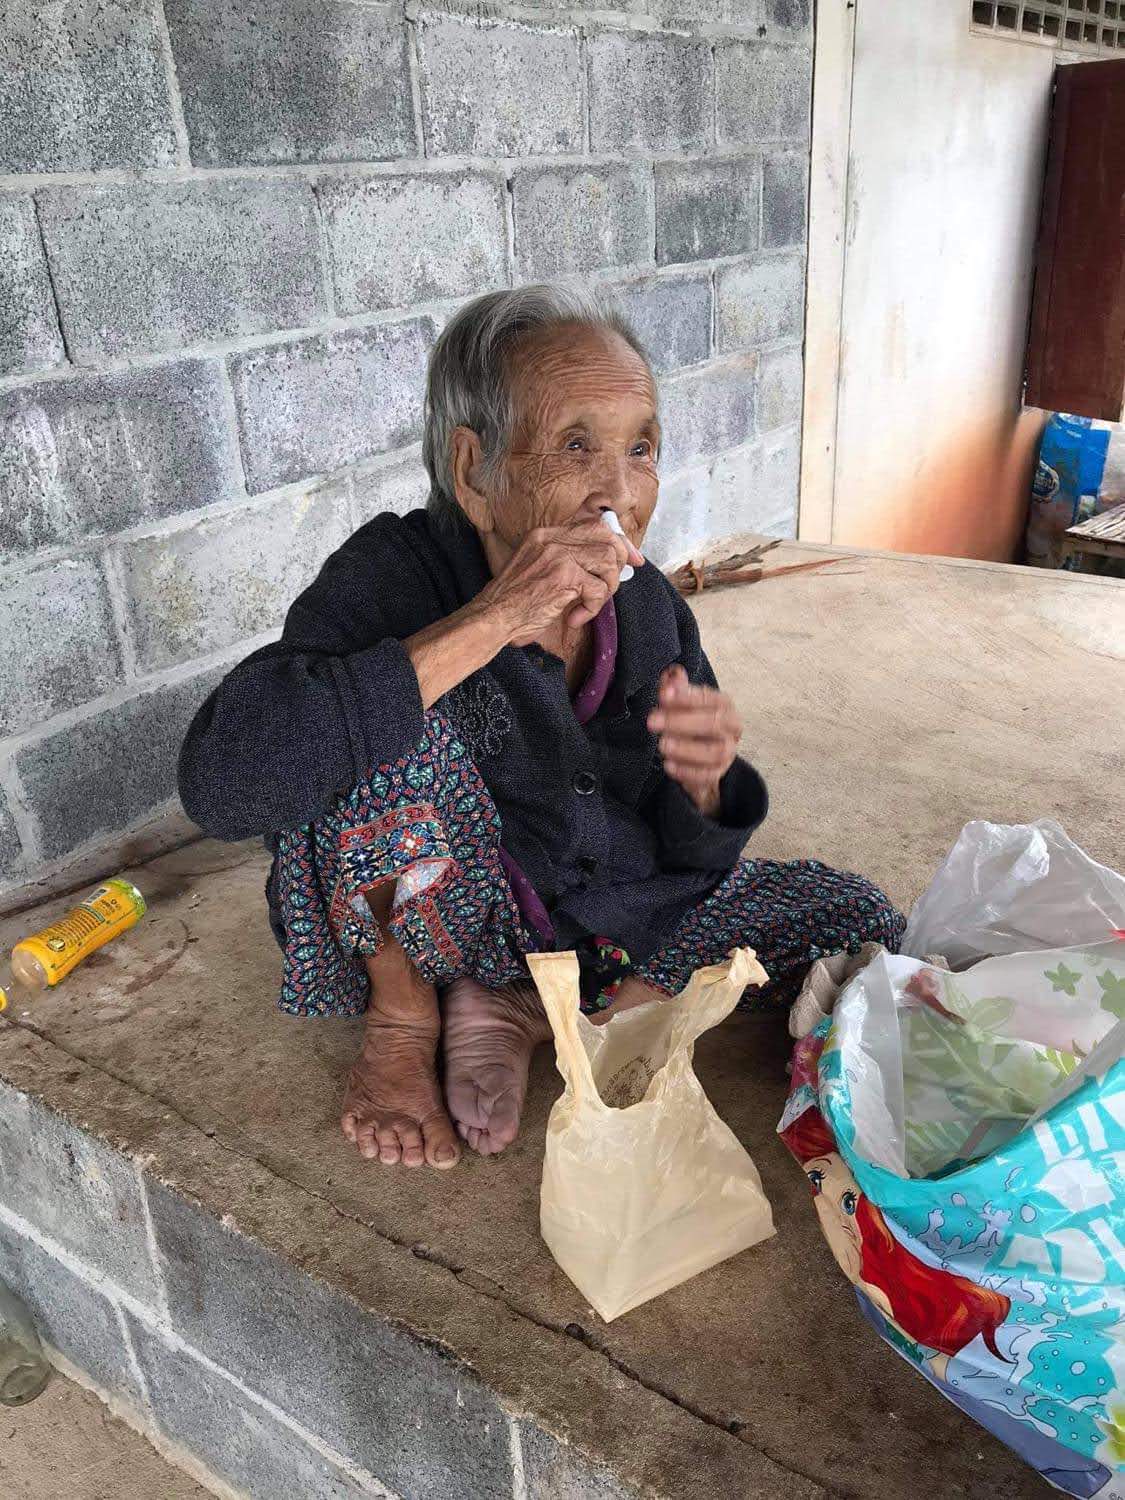 a Thai elder woman sits with a bag of food in front of her and sniffing an inhaler